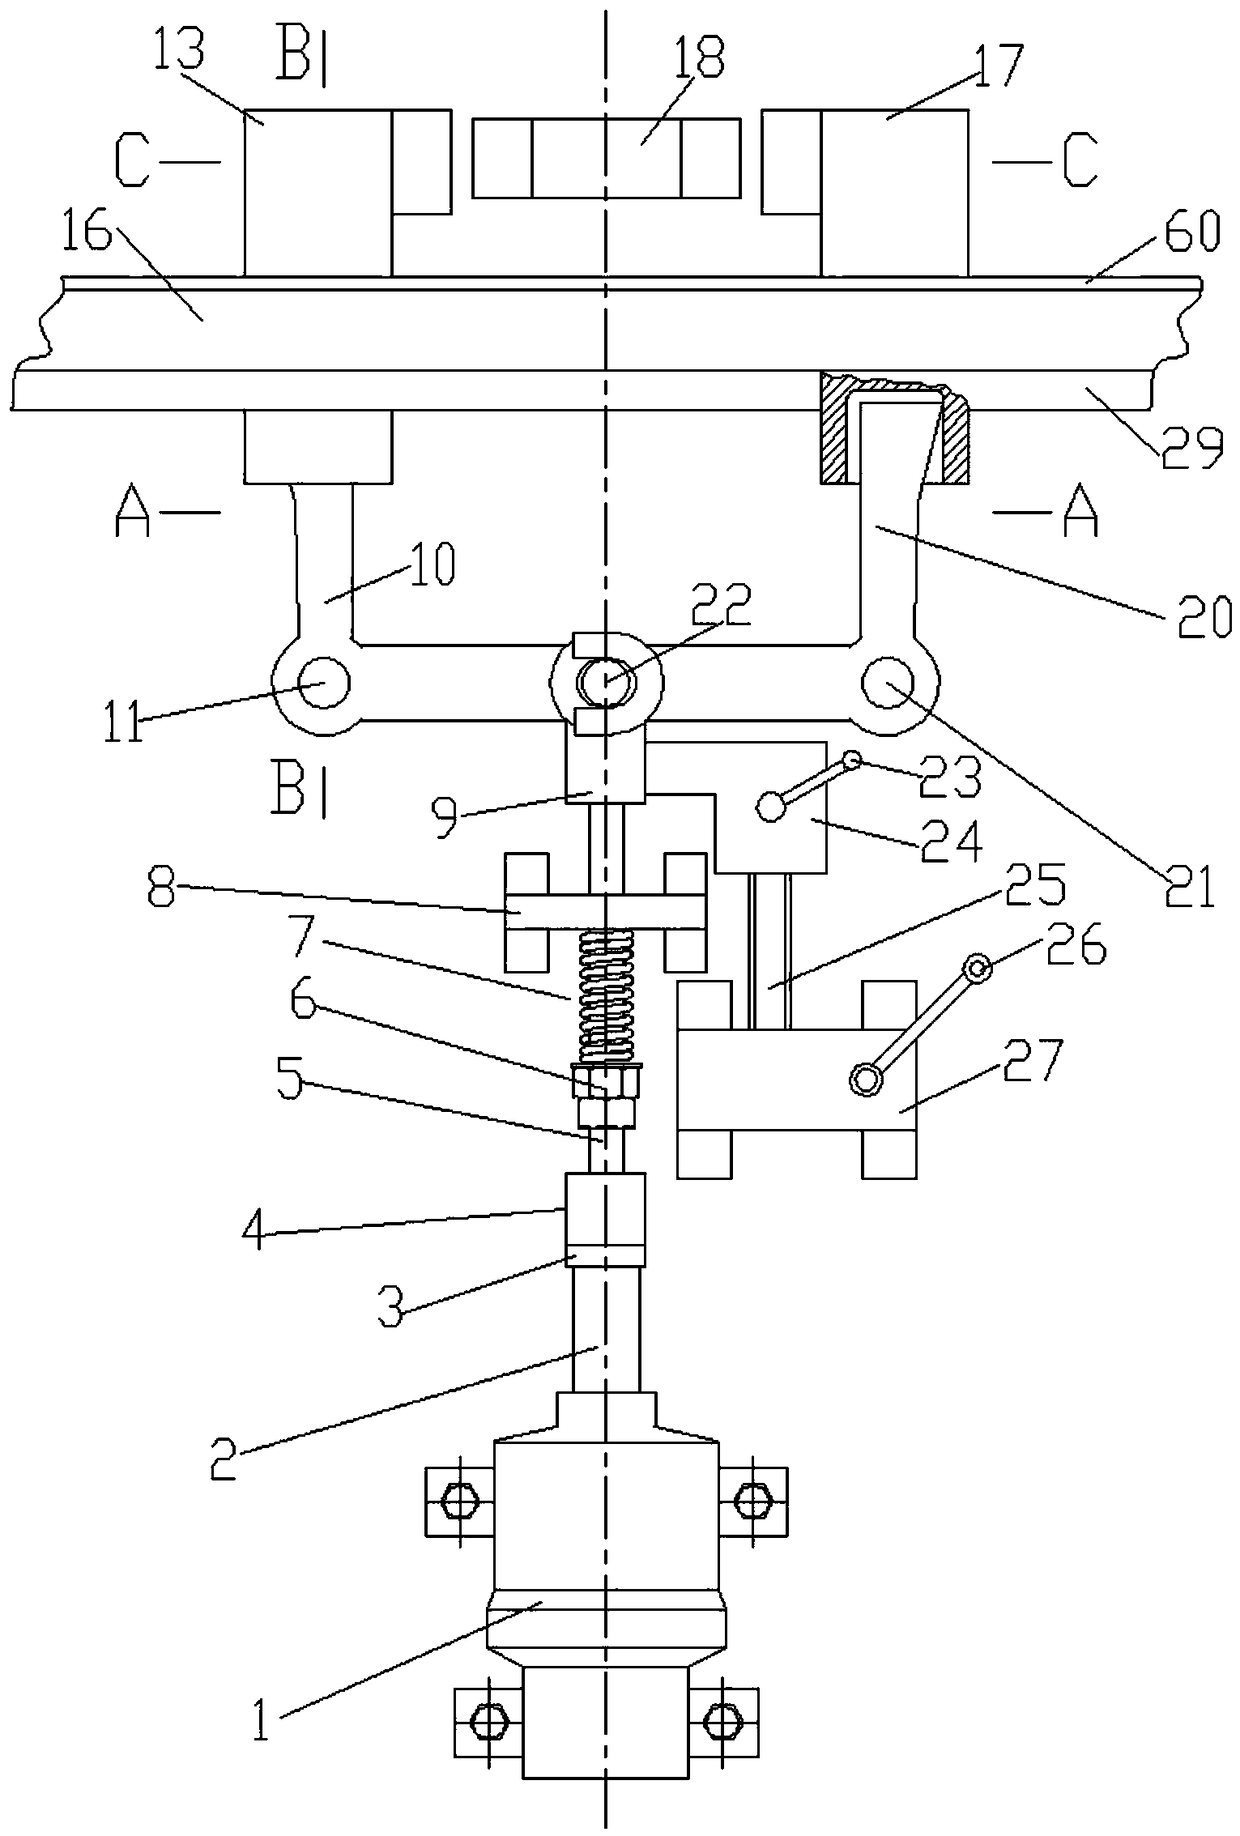 Horizontal electromagnetic push safety braking device for rack and pinion lifting equipment